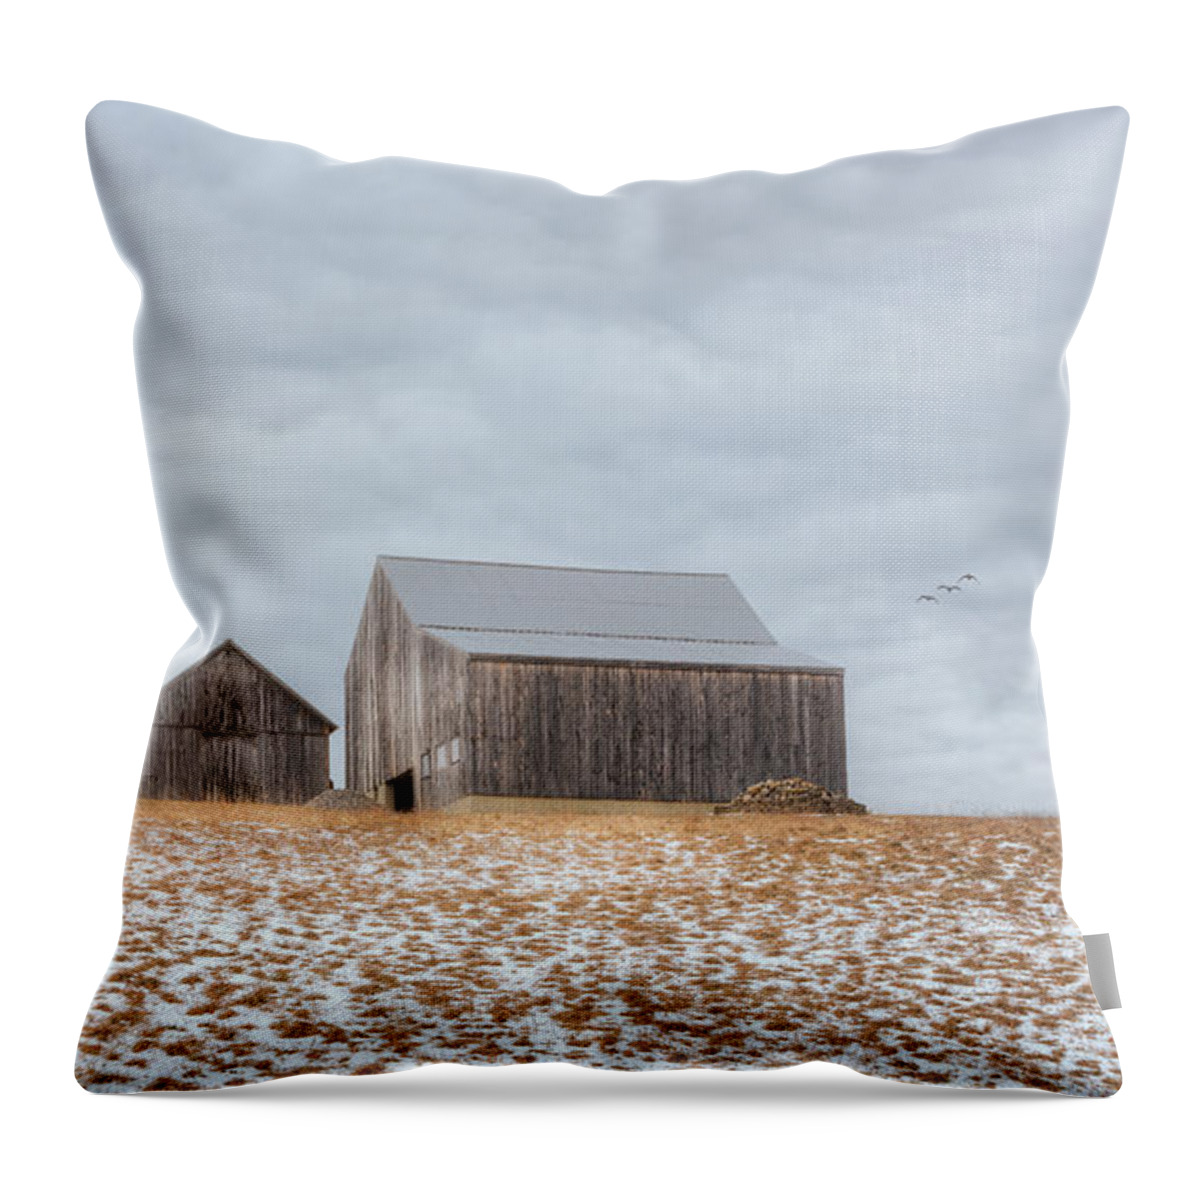 Barn Throw Pillow featuring the photograph Overcast by Bill Wakeley